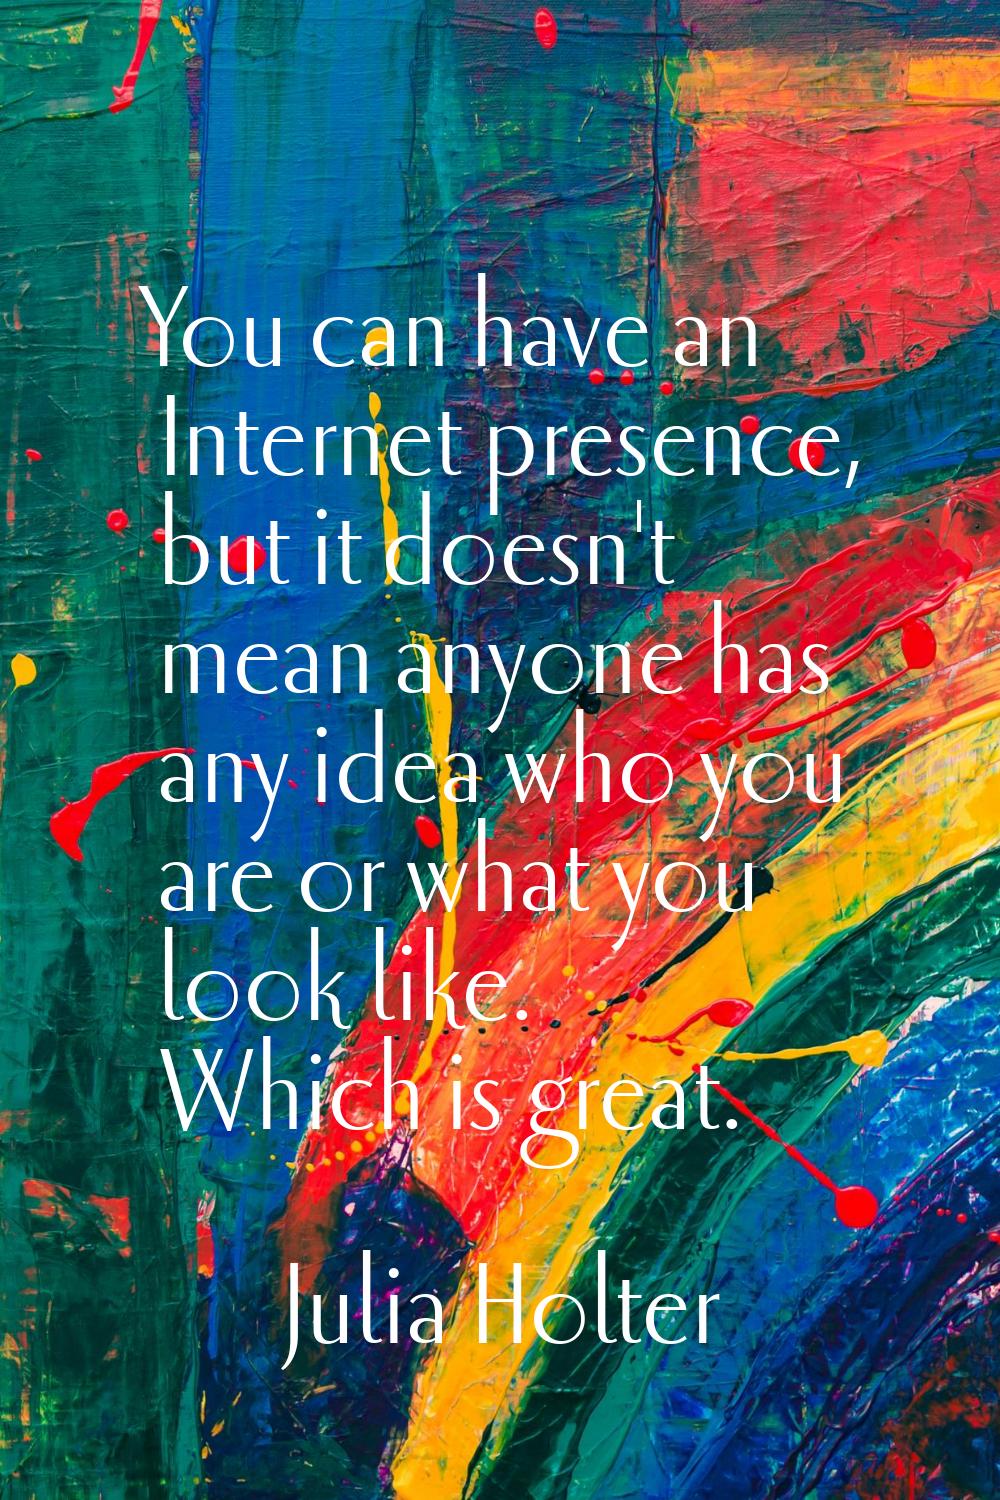 You can have an Internet presence, but it doesn't mean anyone has any idea who you are or what you 